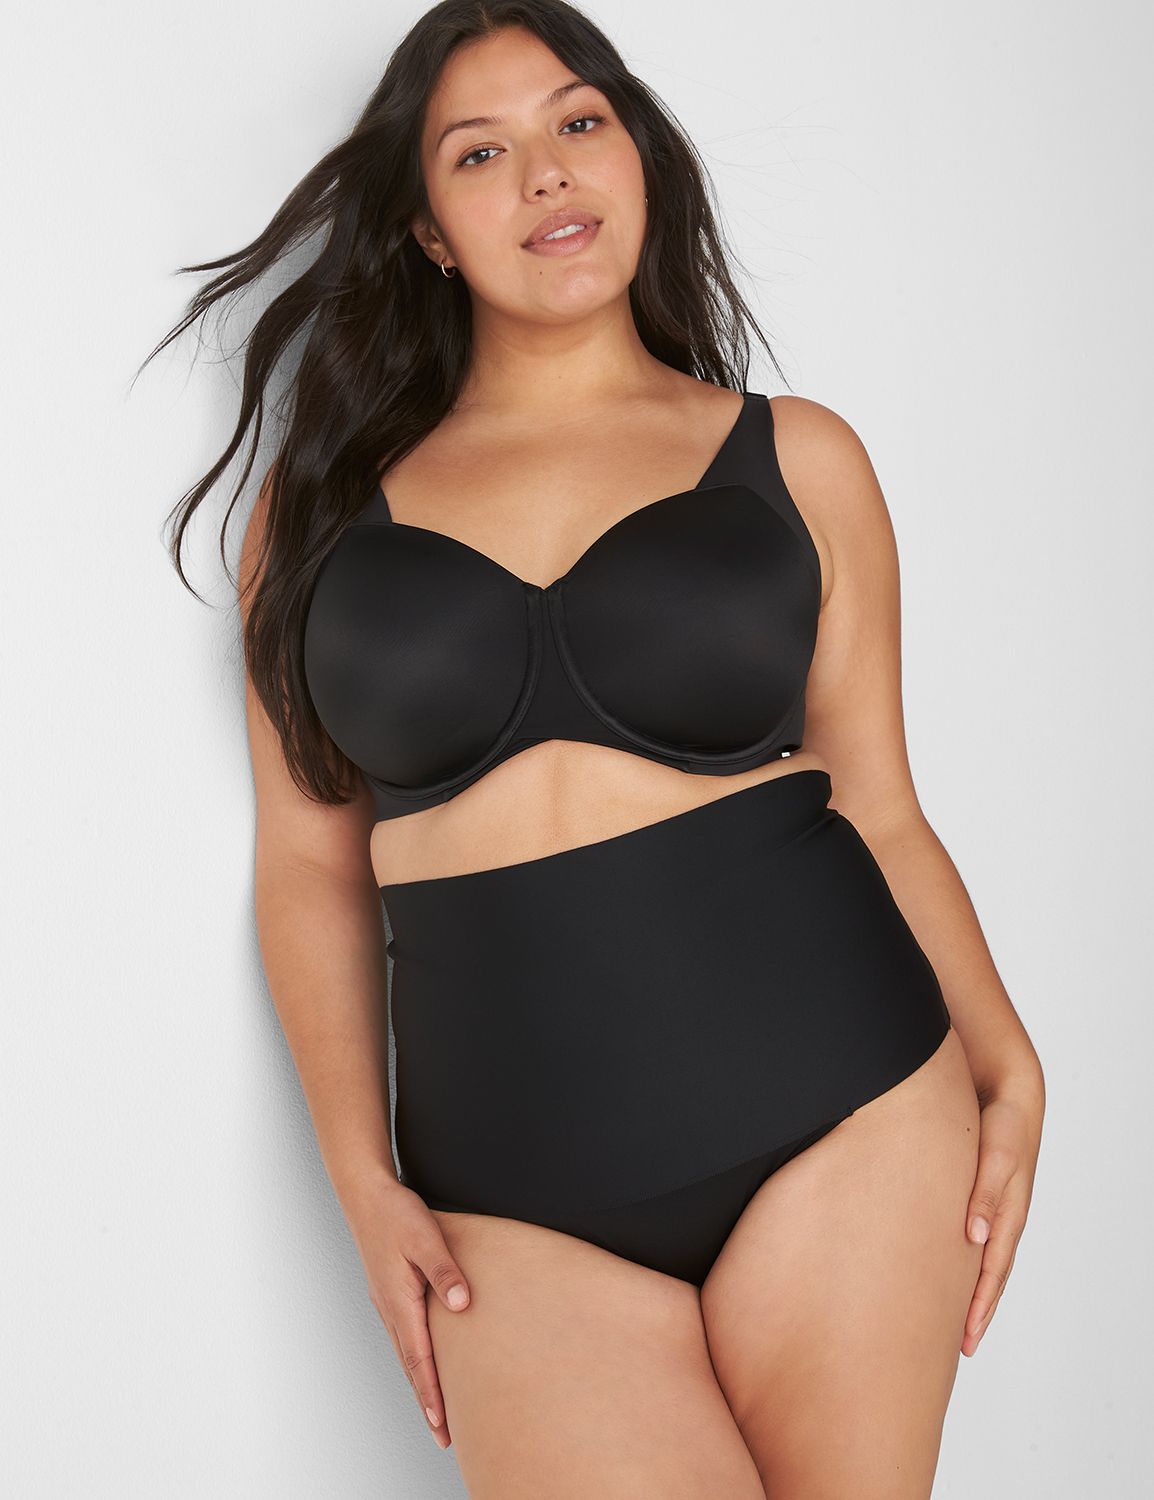 Skinny Girl  Smoothers & Shapers Black Size M - $15 (60% Off